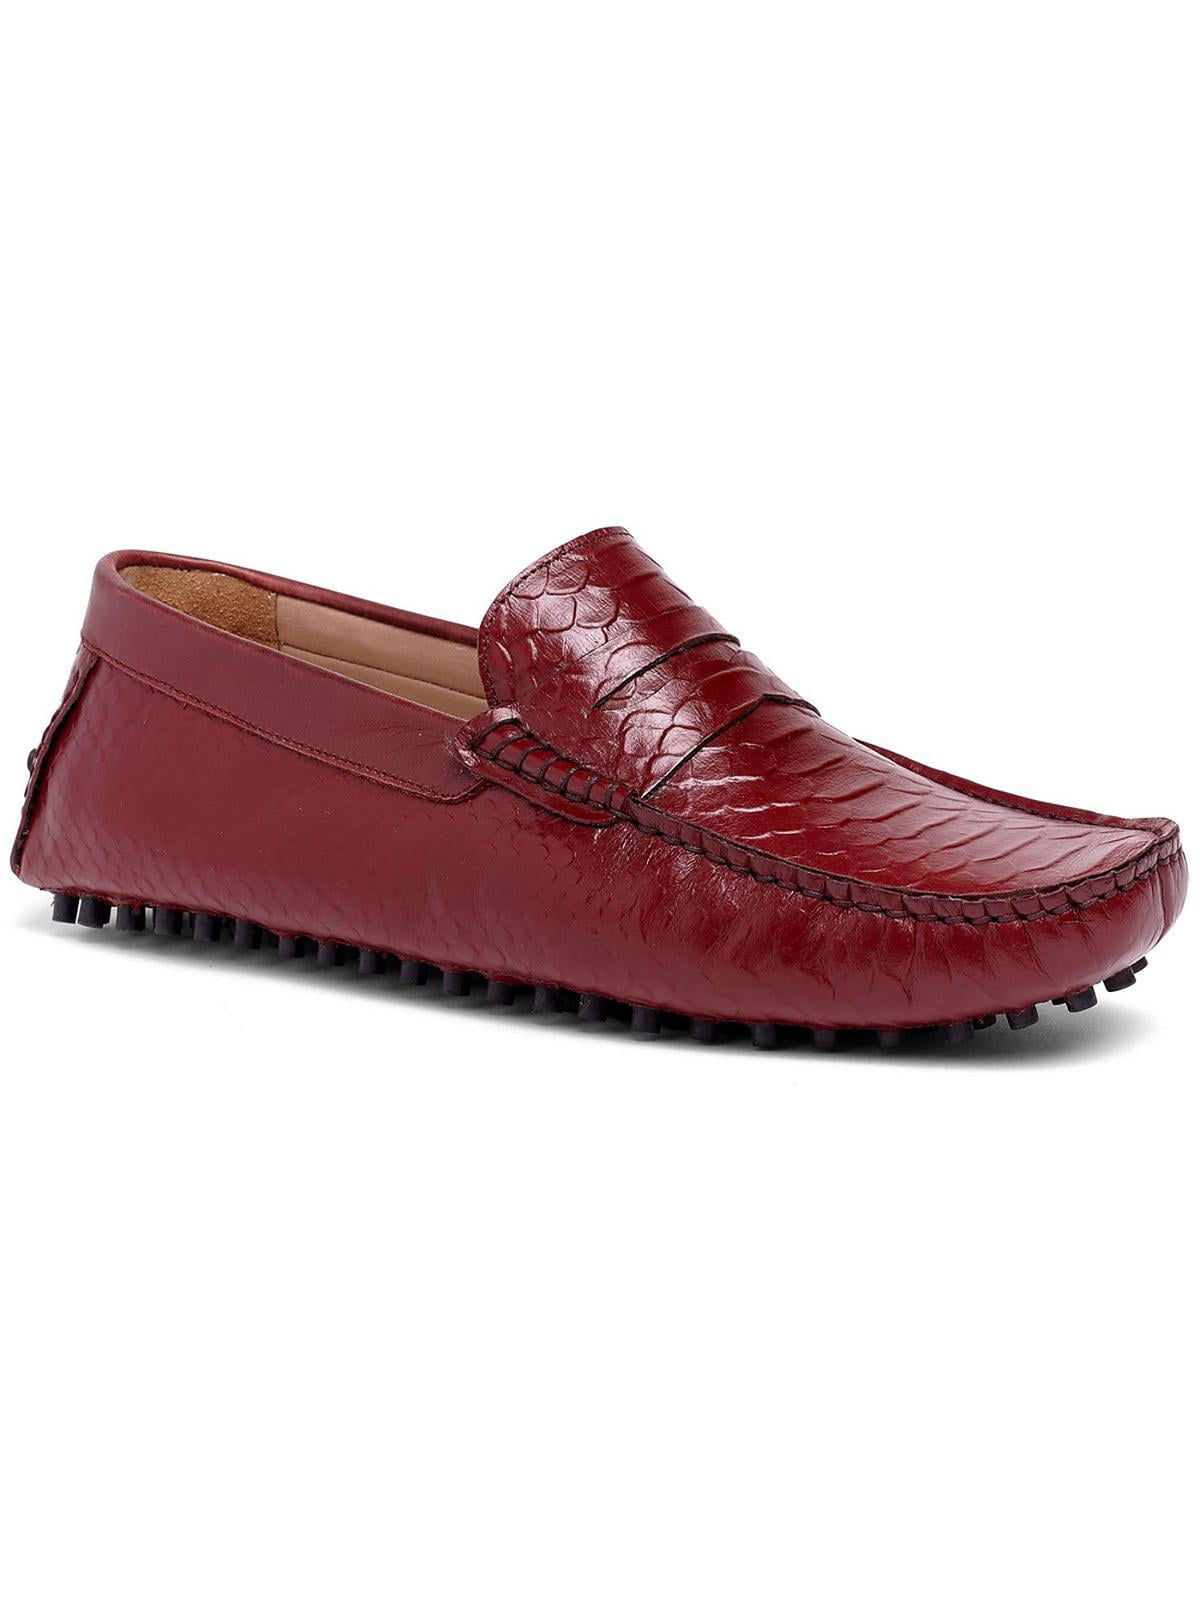 Carlos by Carlos Santana Mens Jorge Driver Leather Slip On Loafers ...